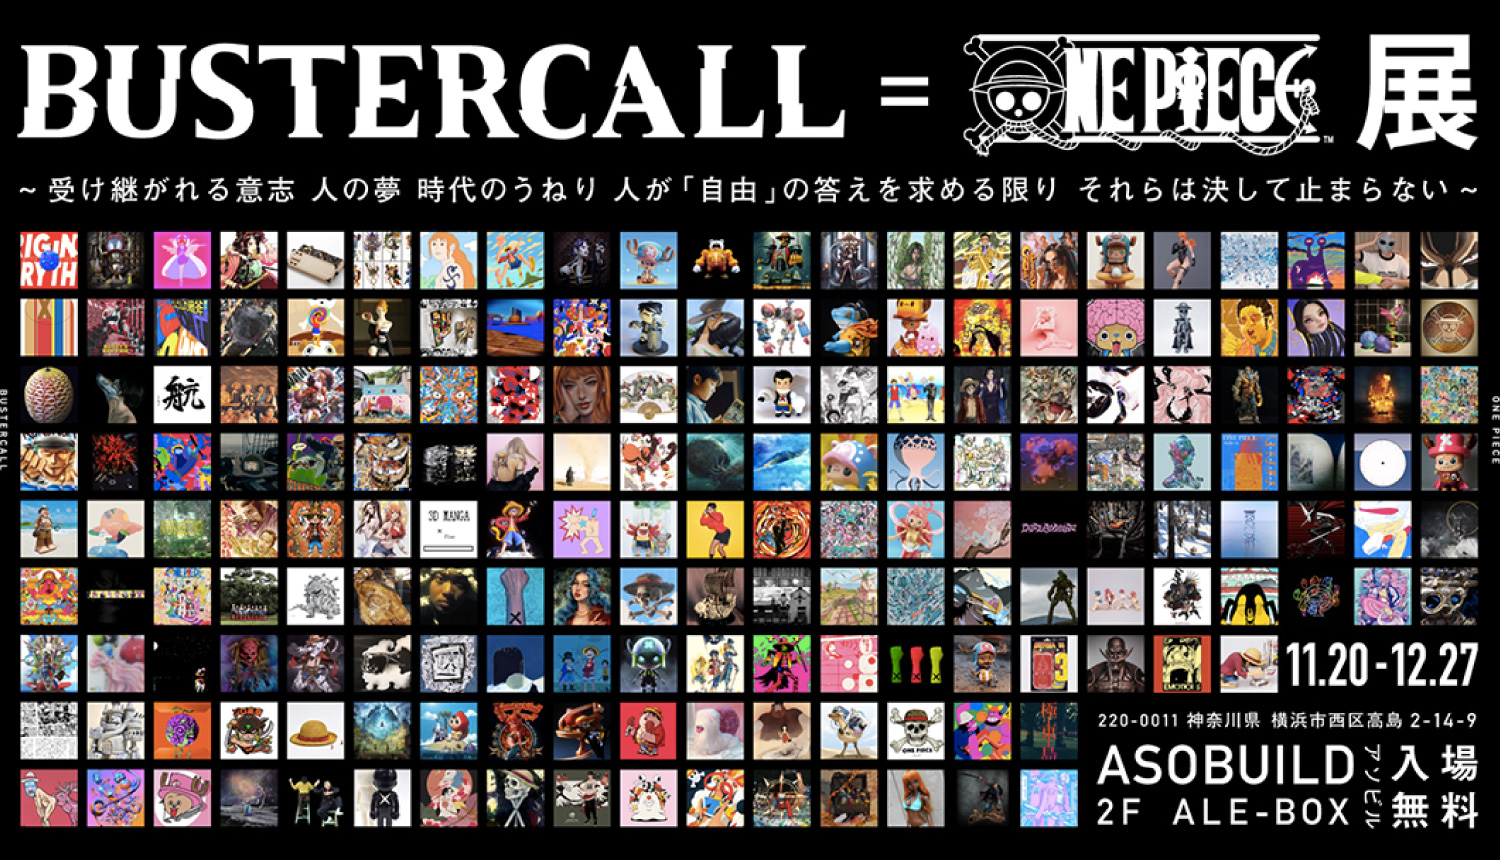 BUSTERCALL＝ONE-PIECE展-ONE-PIECE-Exhibition-航海王